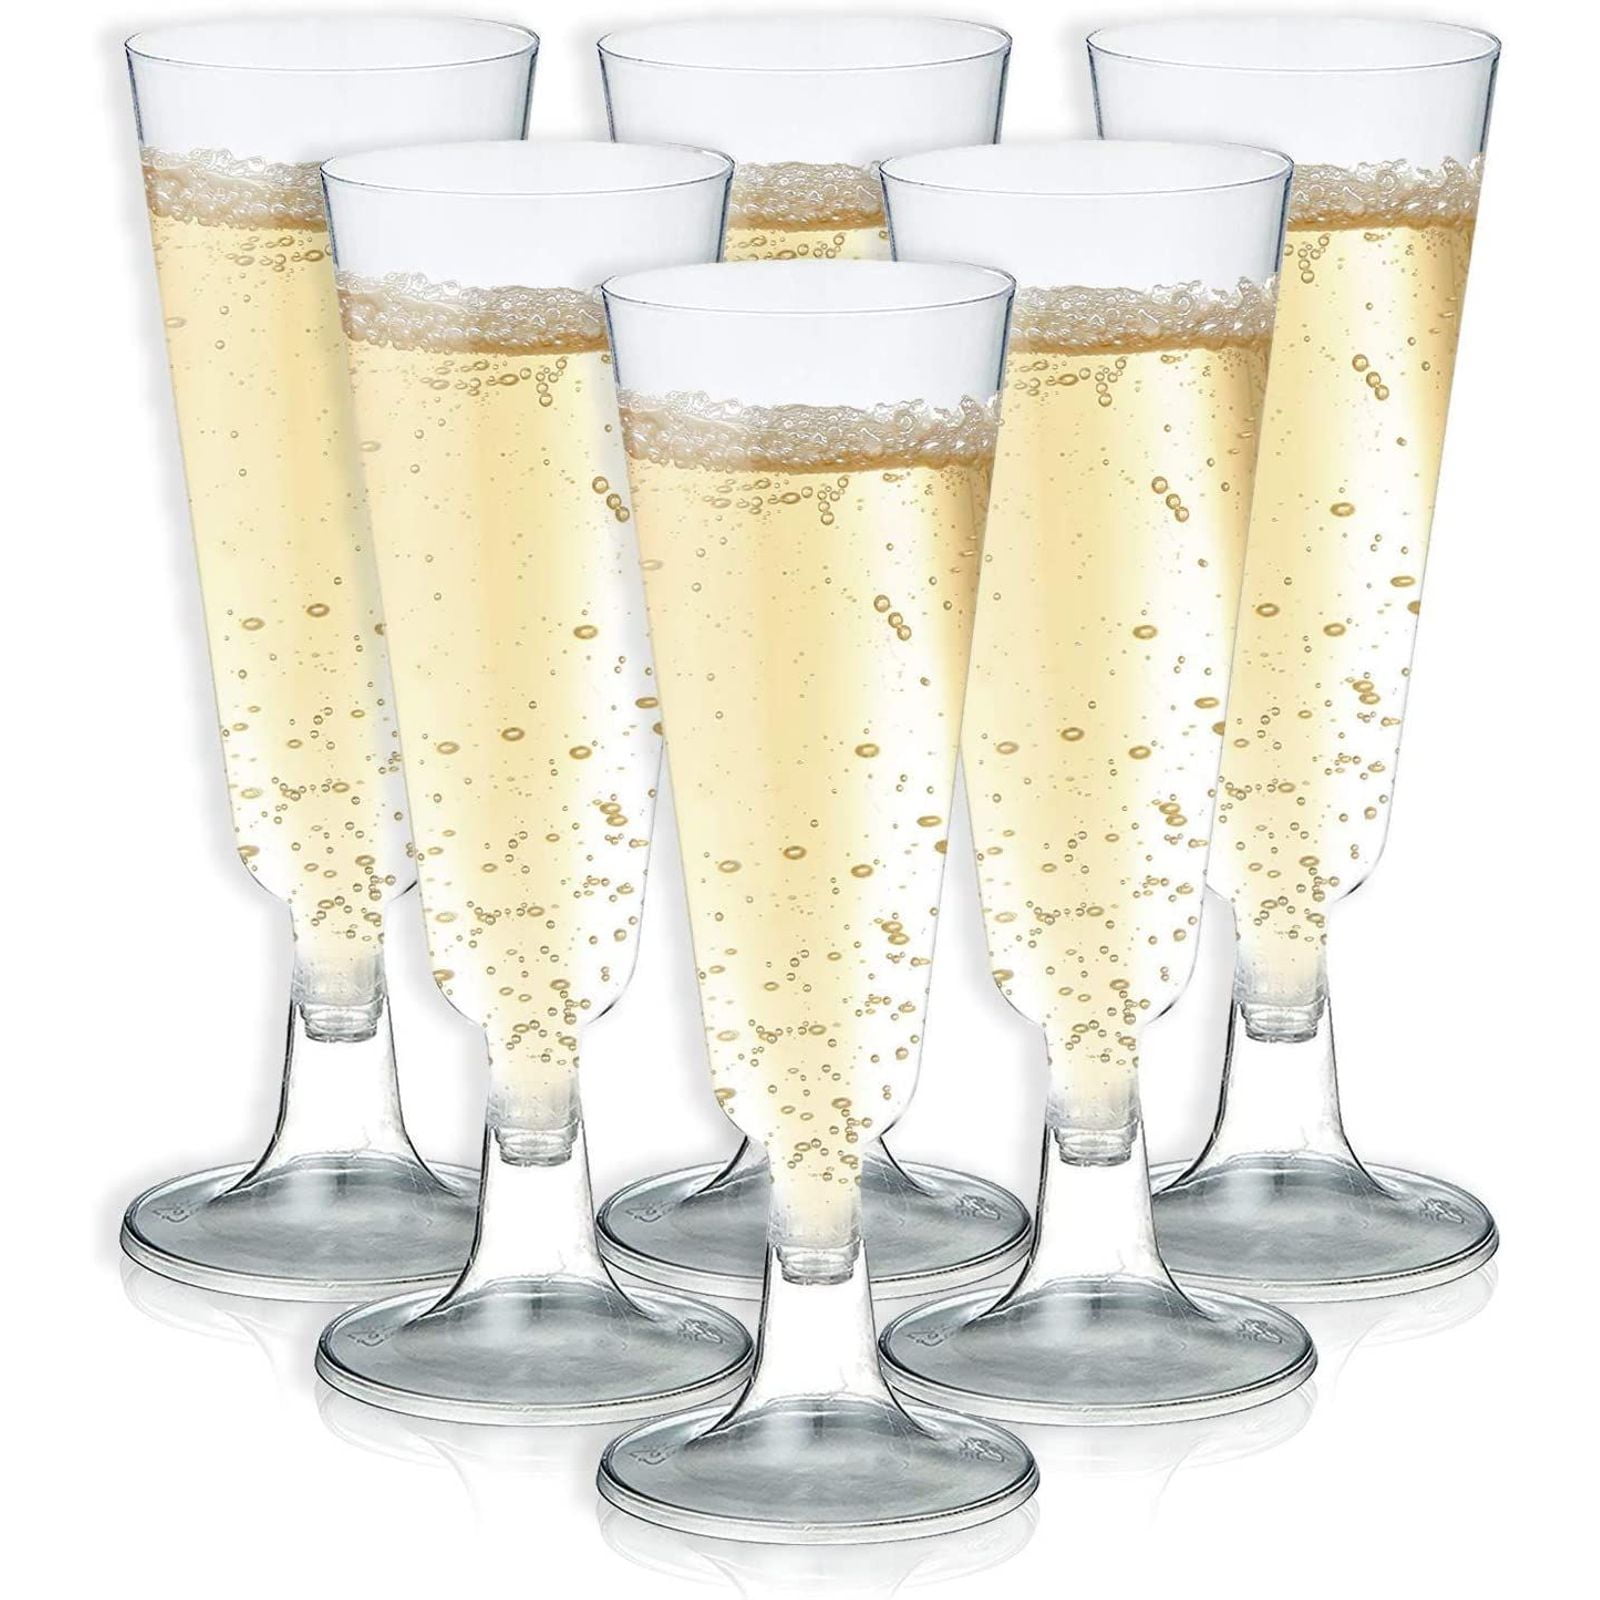 140ml CLEAR PLASTIC CHAMPAGNE GLASSES FLUTES PARTY 504 